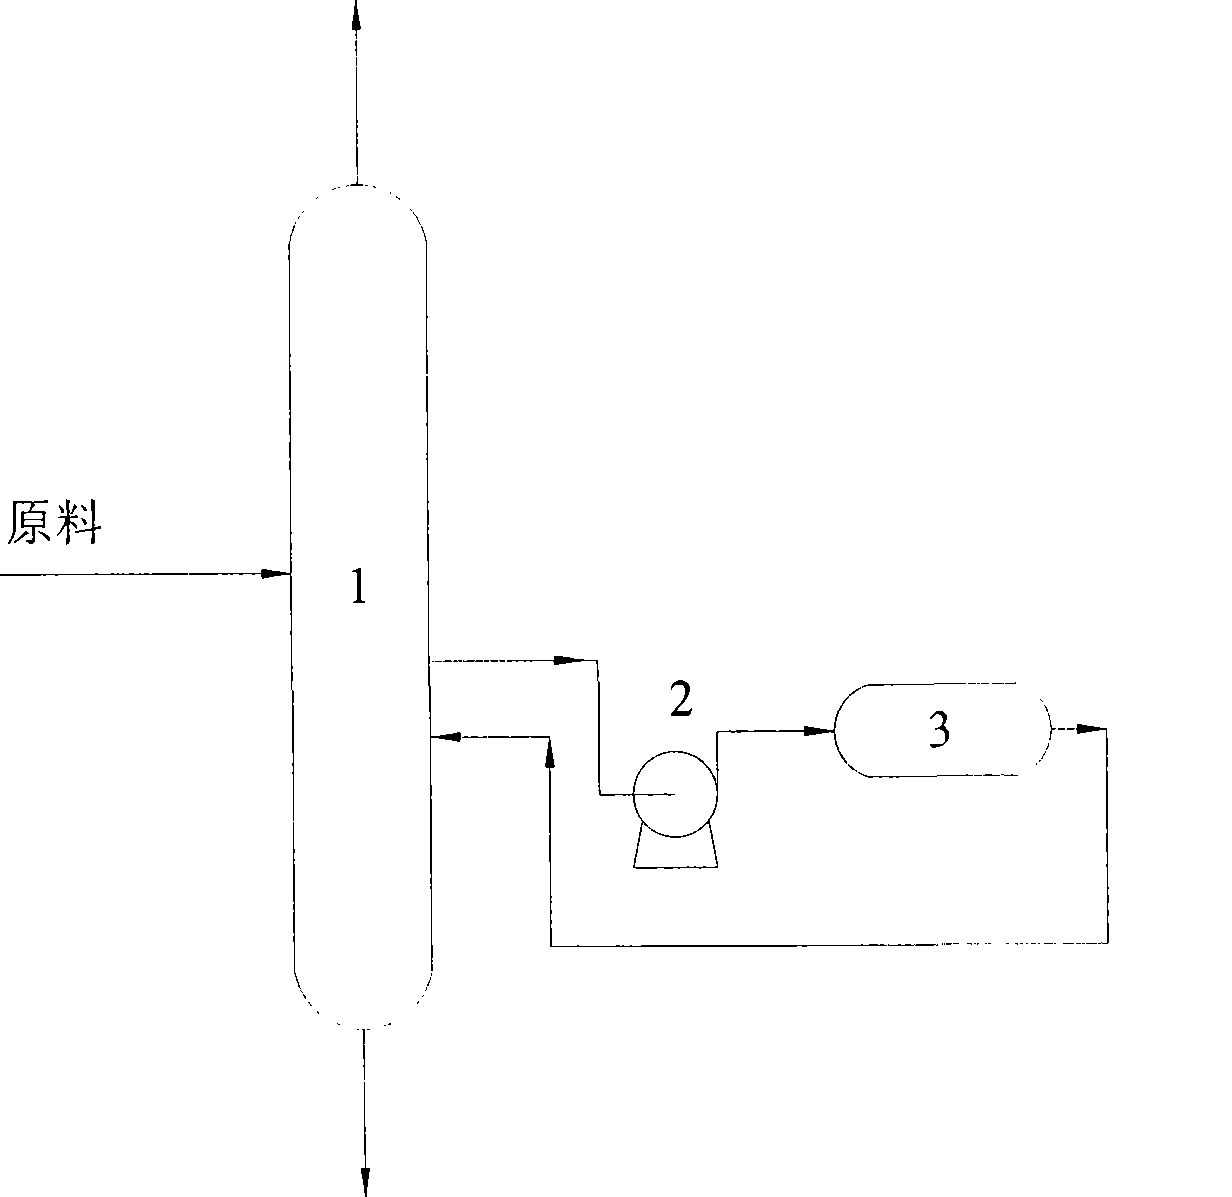 Method for separating and cracking cyclopentadienyl from carbon 5 fraction